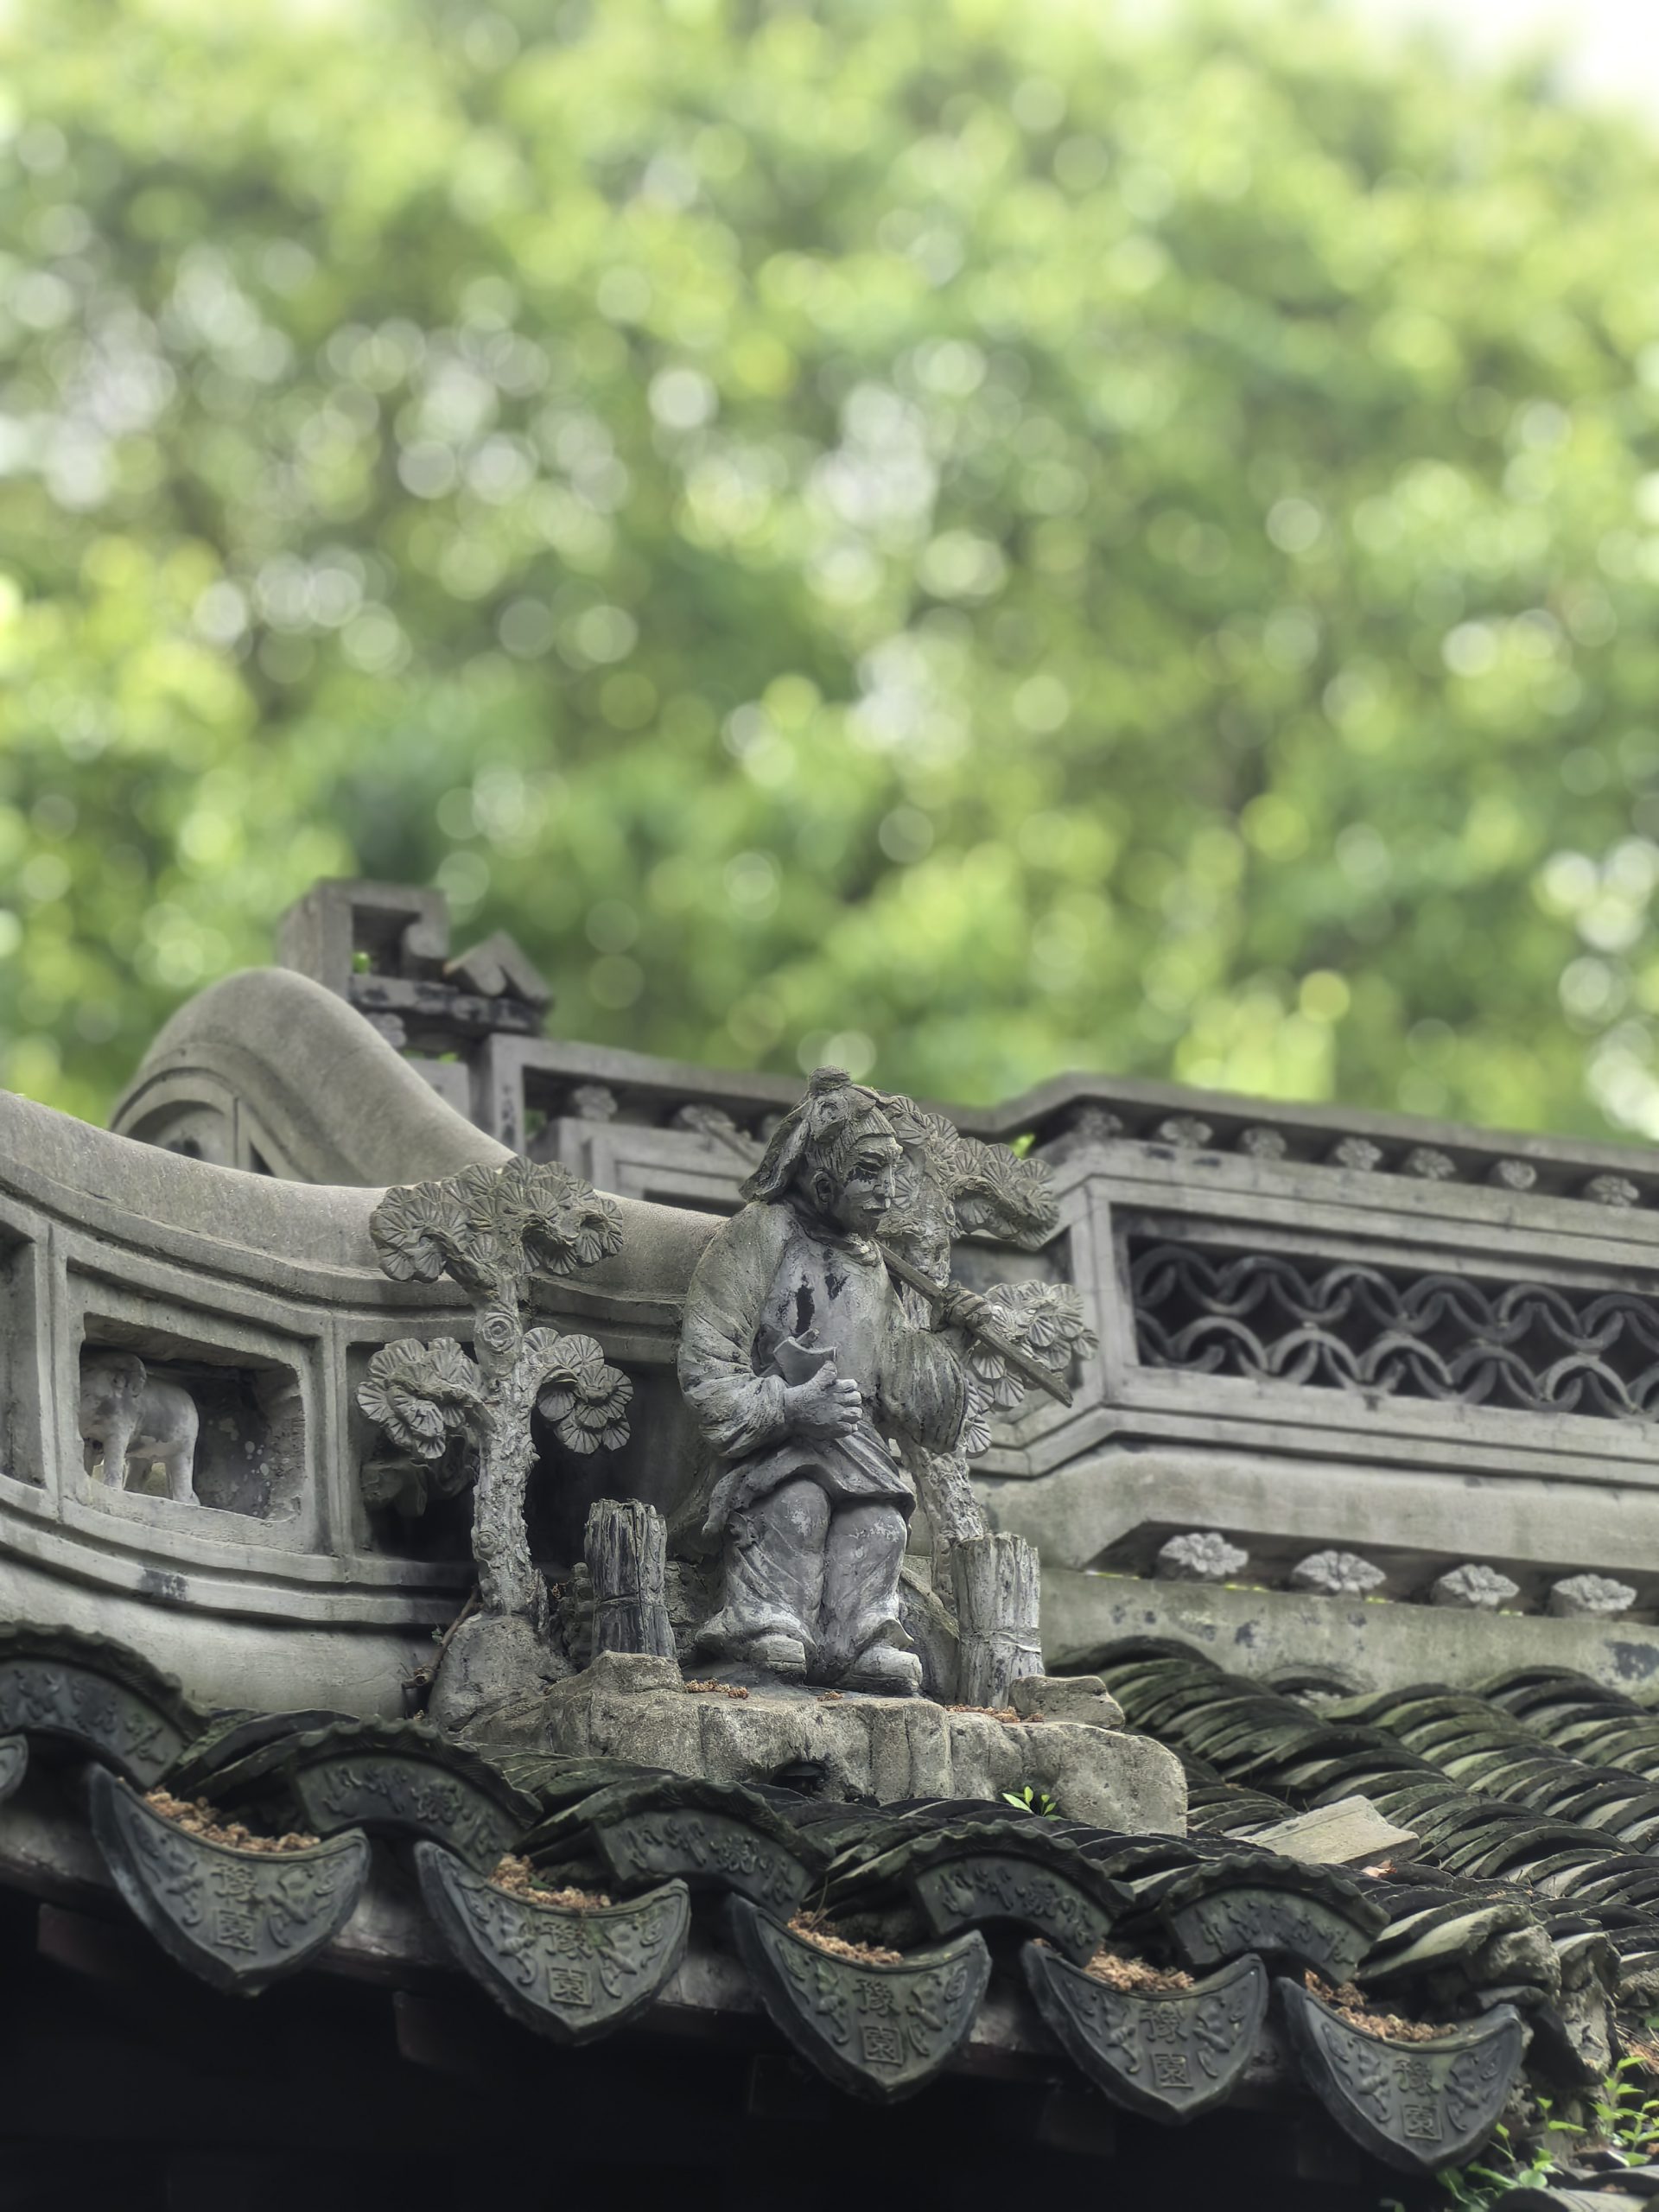 The artistry on the rooftops of Yu Garden